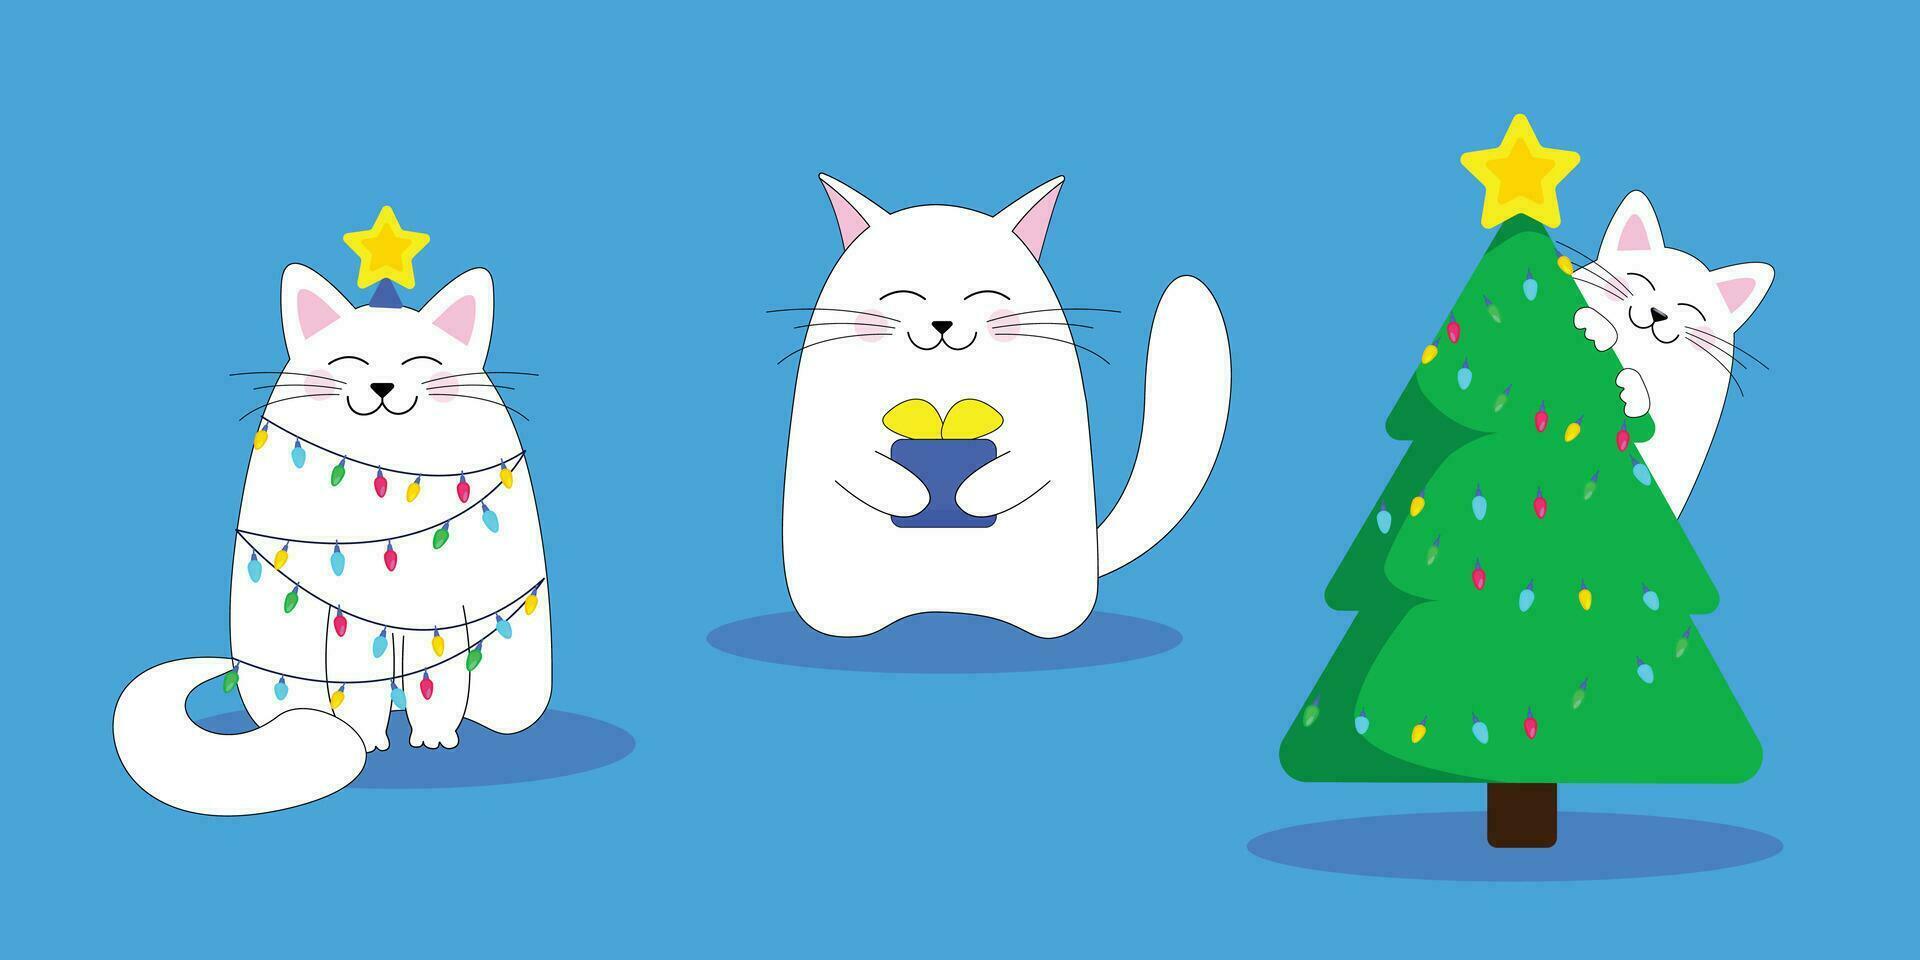 Set of cute Christmas cats. A cat on a Christmas tree, a cat in a garland, a cat with a gift. Vector illustration of cats. Merry Christmas drawing of cute kittens. Merry Christmas illustration.